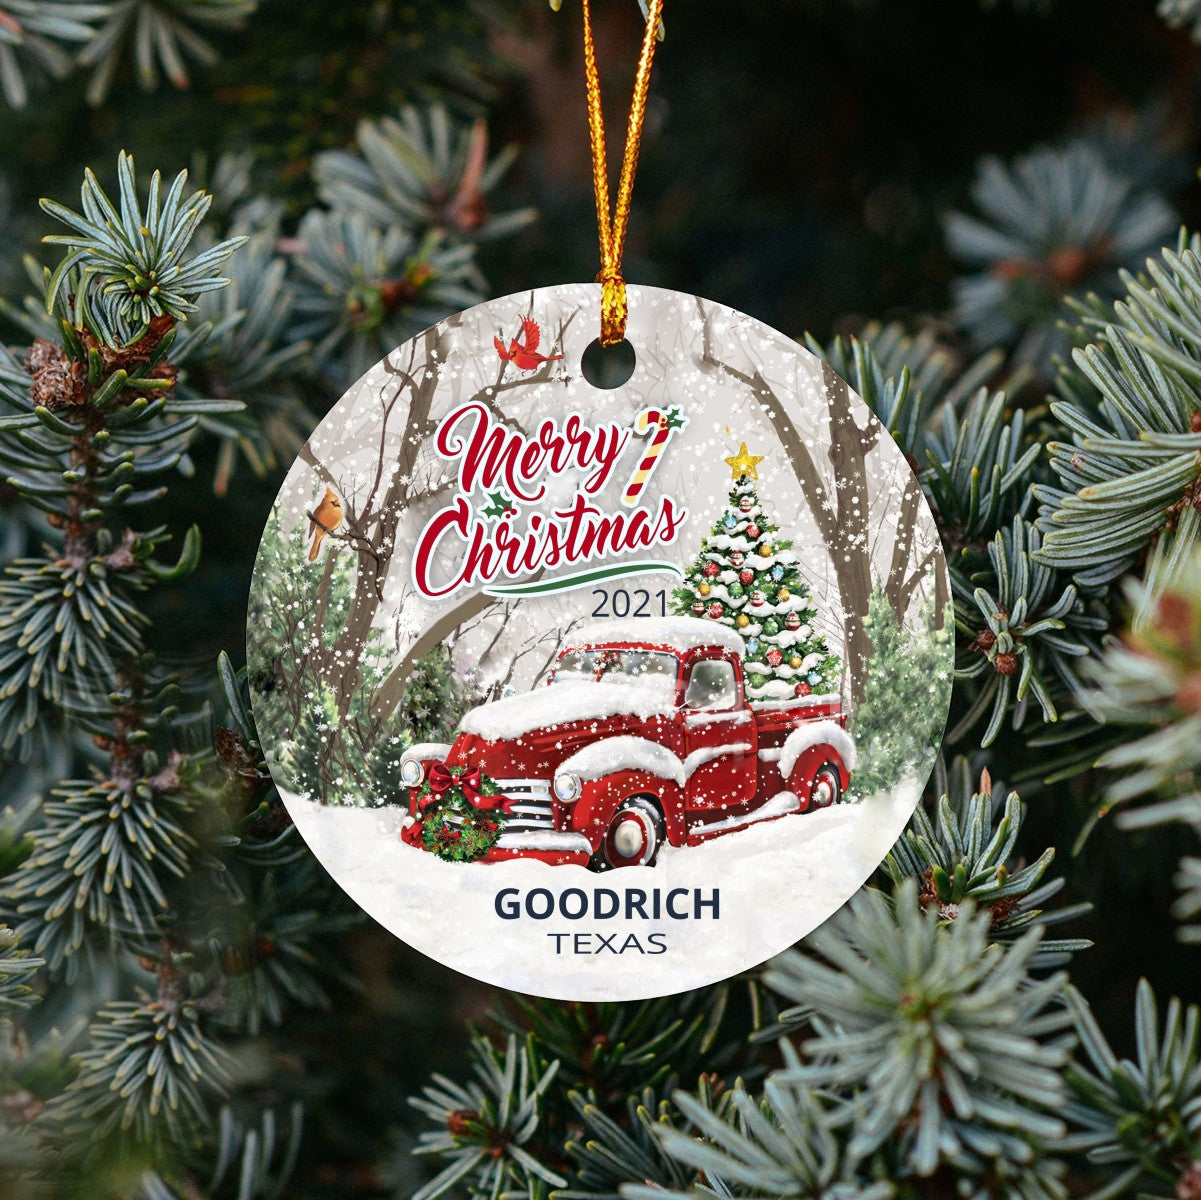 Christmas Tree Ornaments Goodrich - Ornament With Name City, State Goodrich Texas TX Ornament - Red Truck Xmas Ornaments 3'' Plastic Gift For Family, Friend And Housewarming